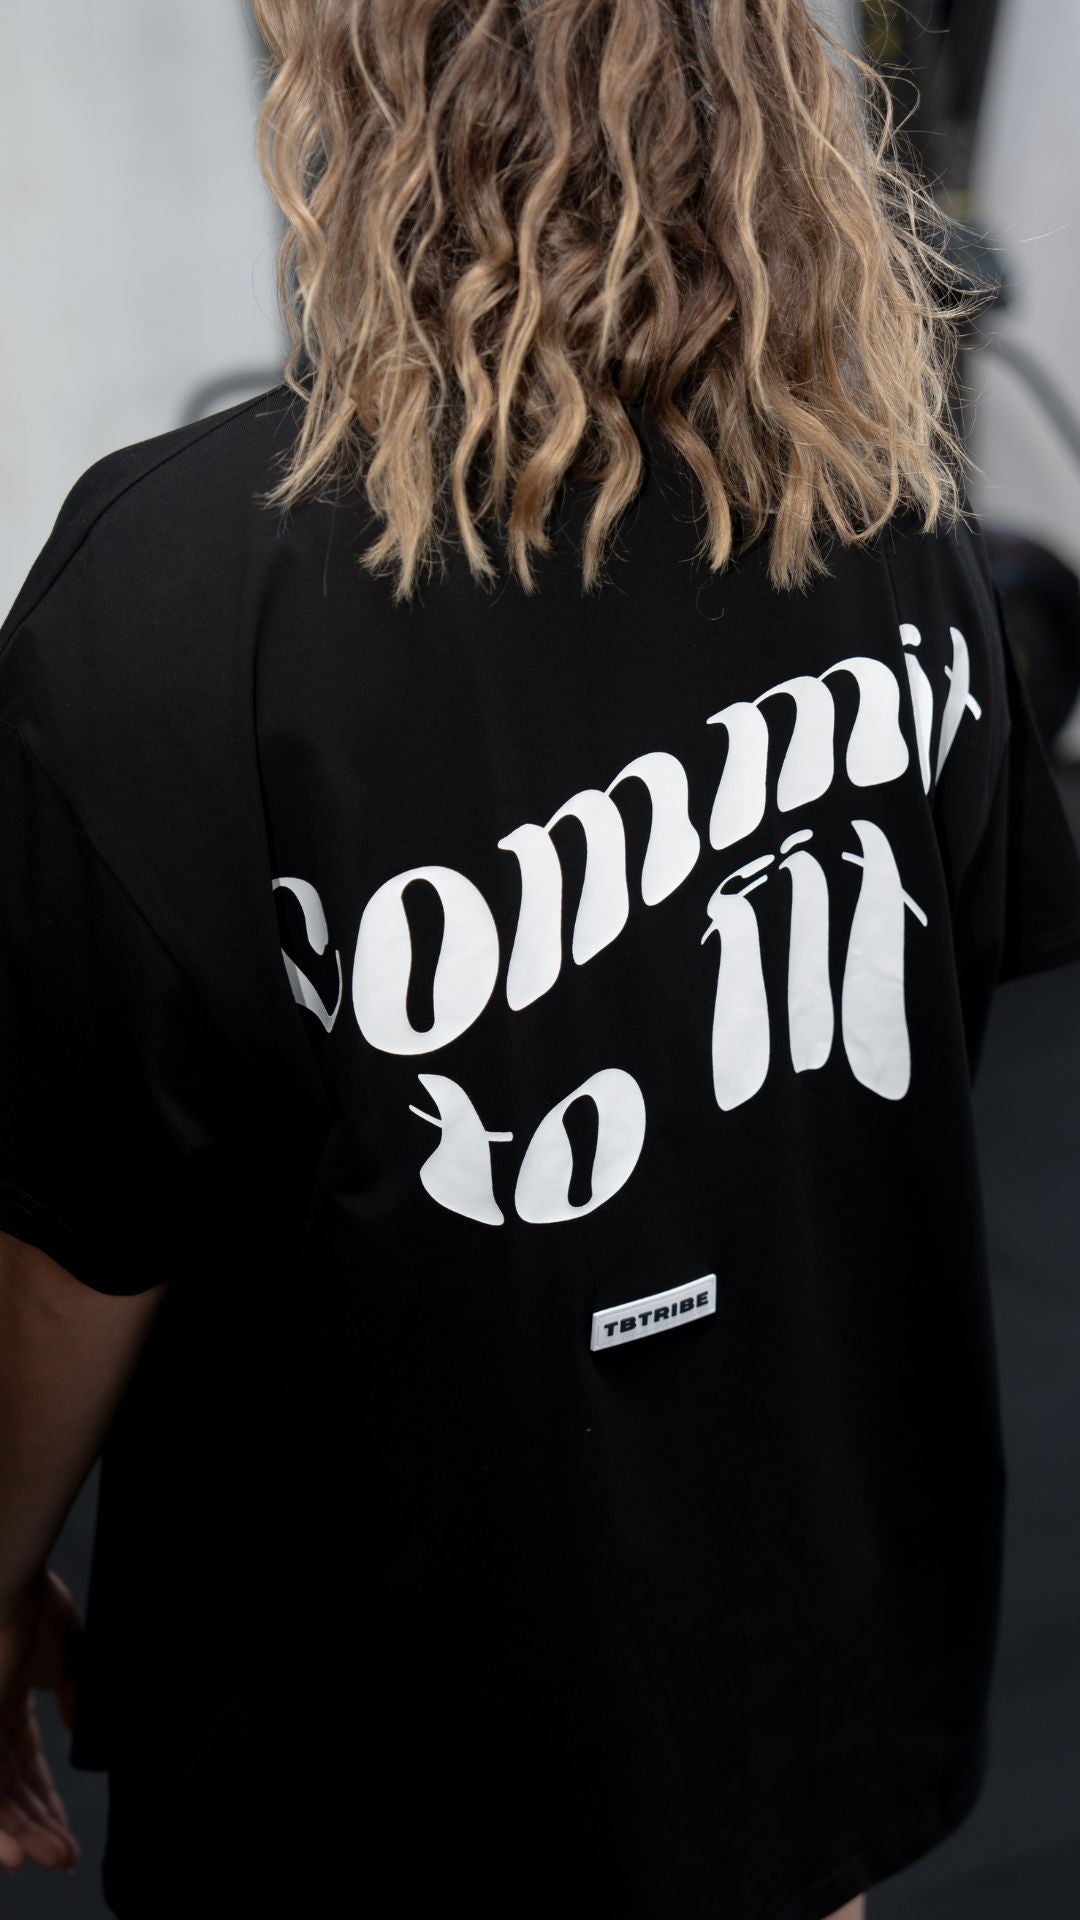 Male and Female model wearing a black oversized t shirt with white writing on the front and back that reads Commit to Fit